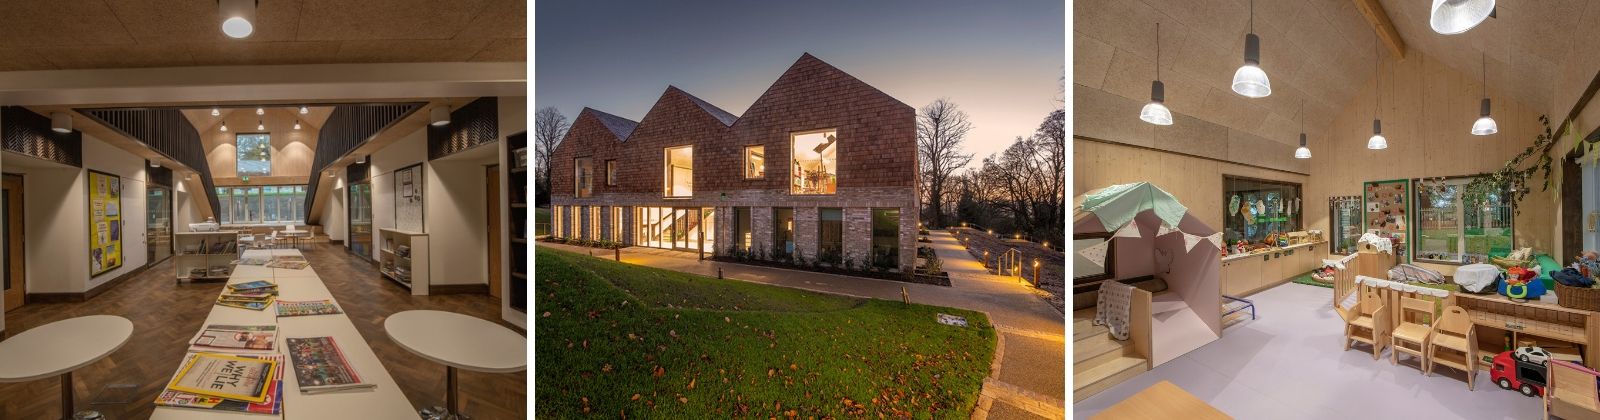 Kingswood Prep School wins Education Project of the Year at the 2019 Michelmores Property Awards